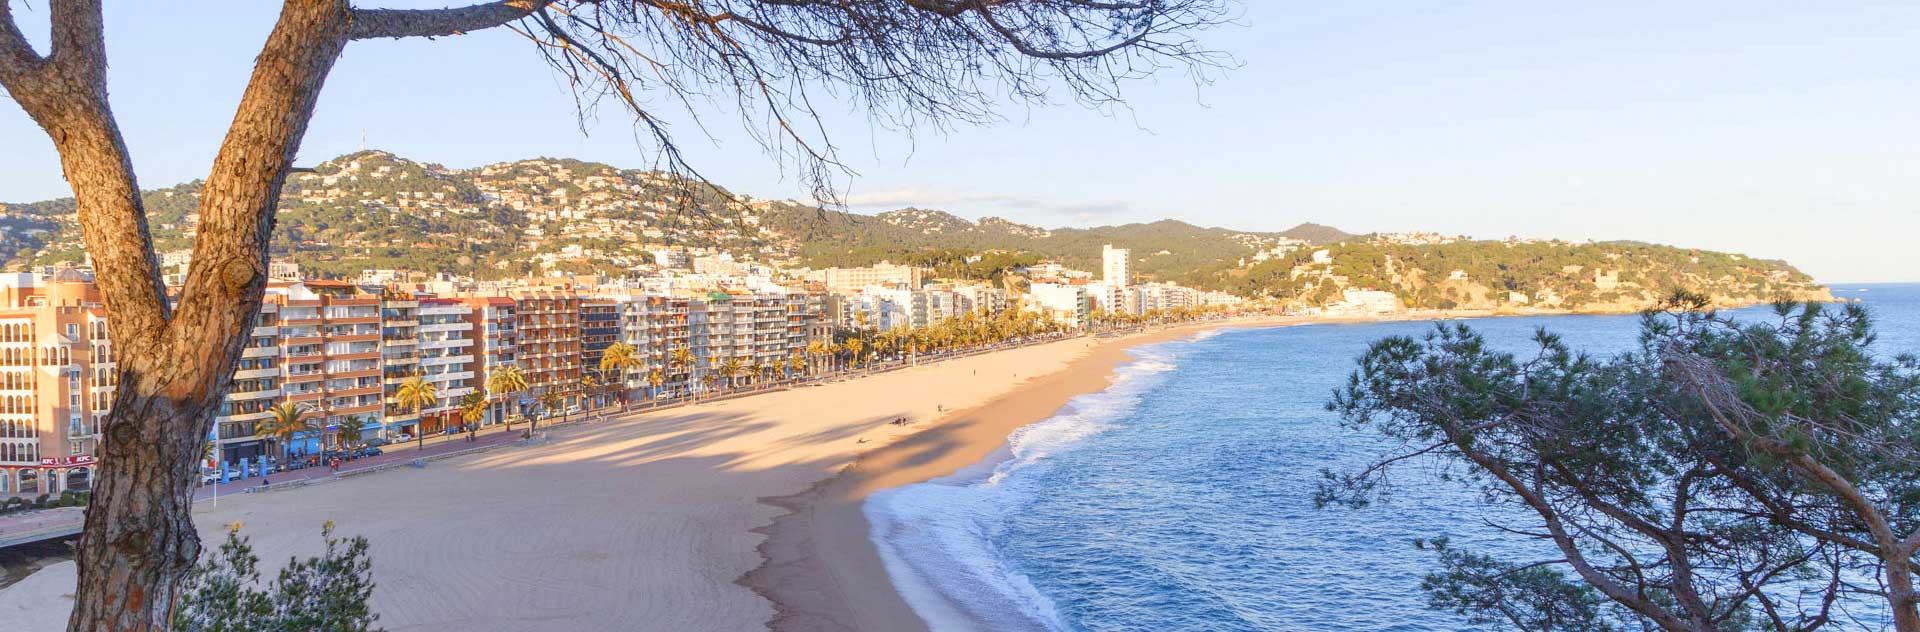 Real Estate Status House for Sale and rental of luxury villas, flats, houses Lloret de Mar, Fenals, Center, Cala Canyellas, Blanes. Holiday rentals in Lloret de Mar. Buy apartments in Fenals